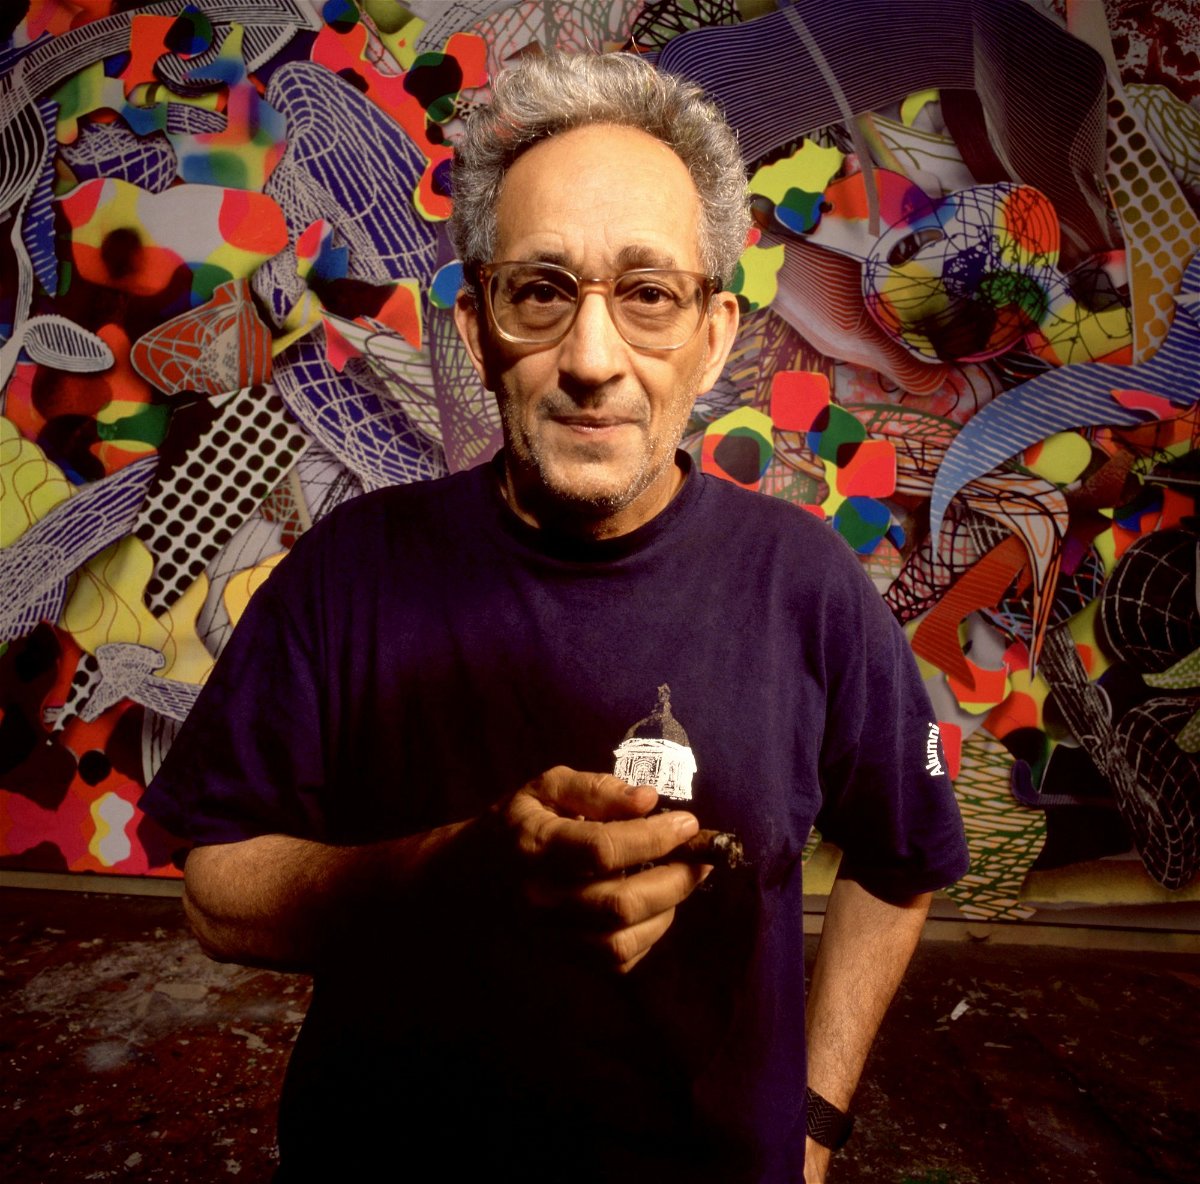 American artist Frank Stella poses for a portrait at his studio in New York in May 1995. Stella, the American artist renowned for his abstract works, died at the age of 87, his longtime representative said in a statement.